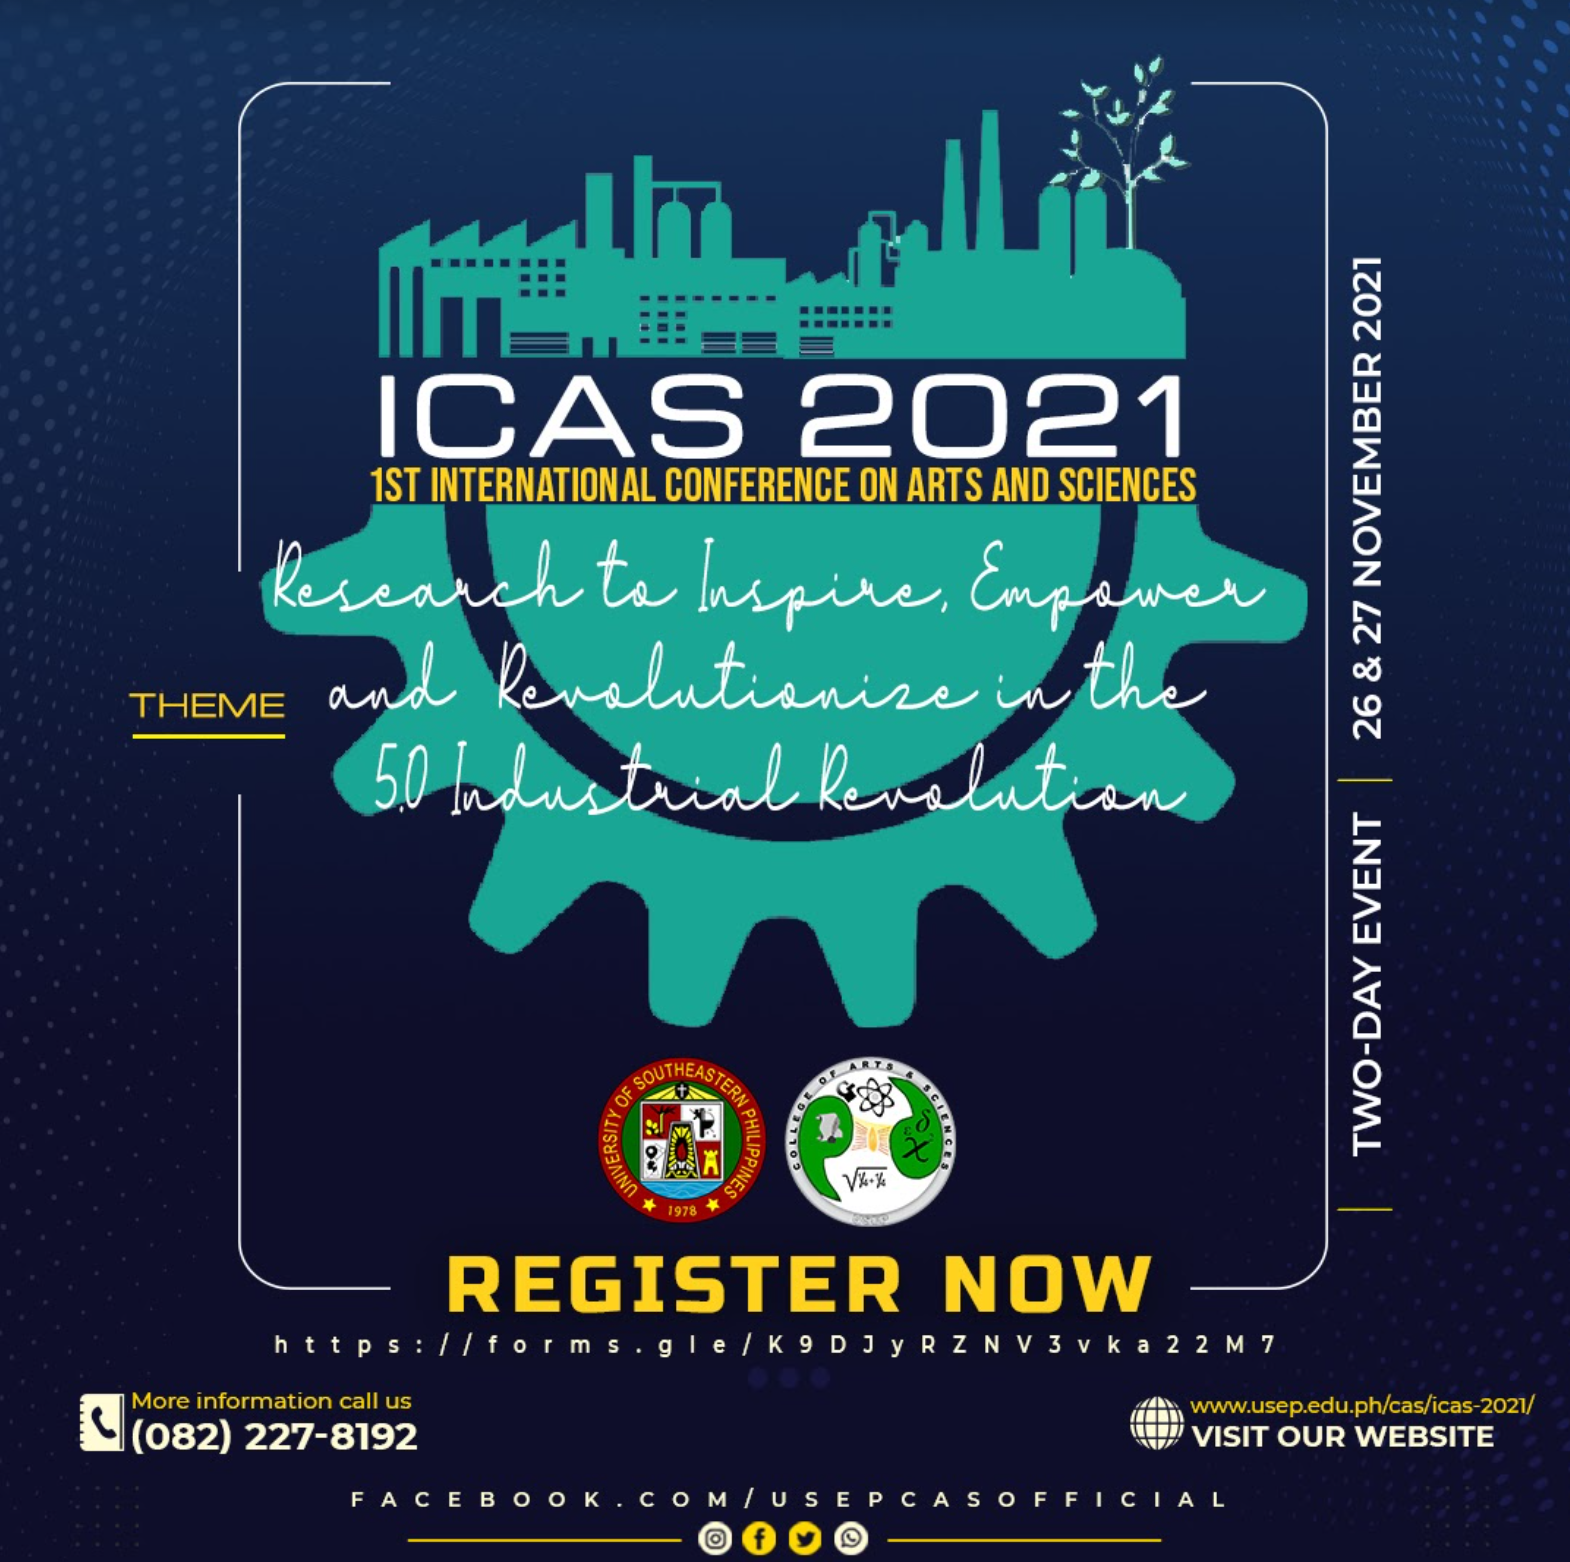 ICAS 2021